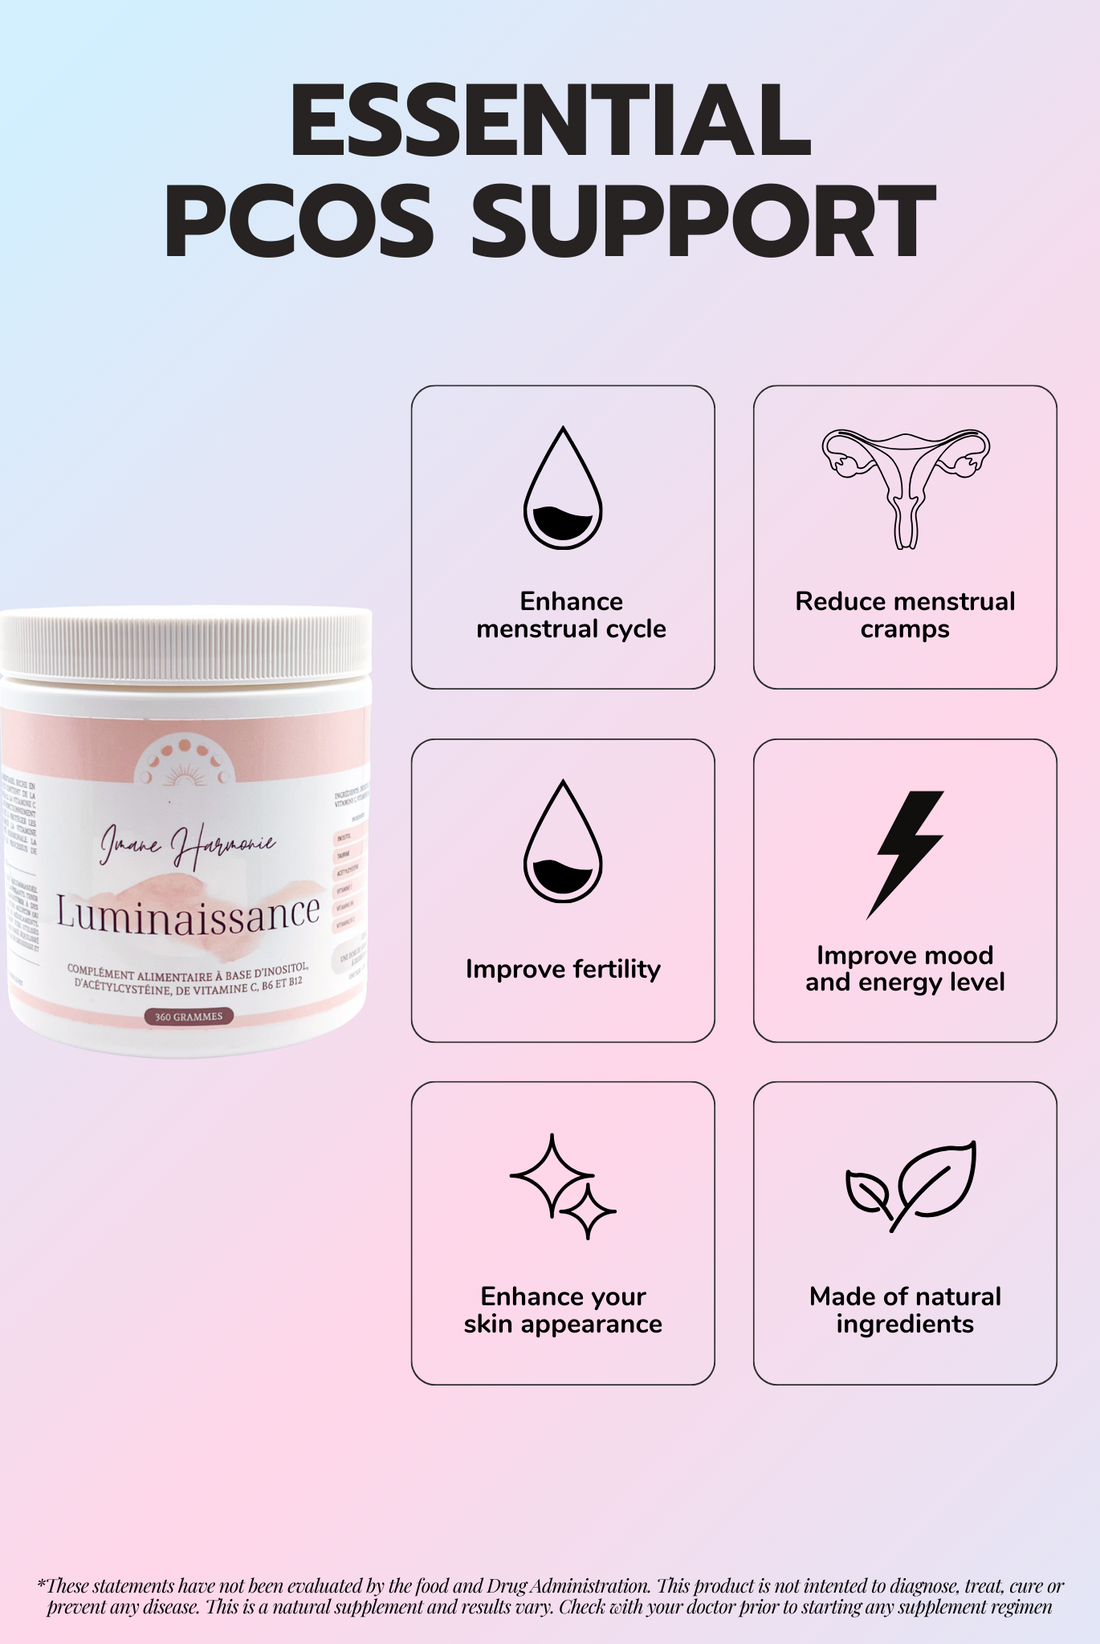 Features of Luminaissance supplement : Enhance menstrual cycle, reduce menstrual cramps, improve fertility, improve mood and energy level, enhance your skin appearance, made of natural ingredients